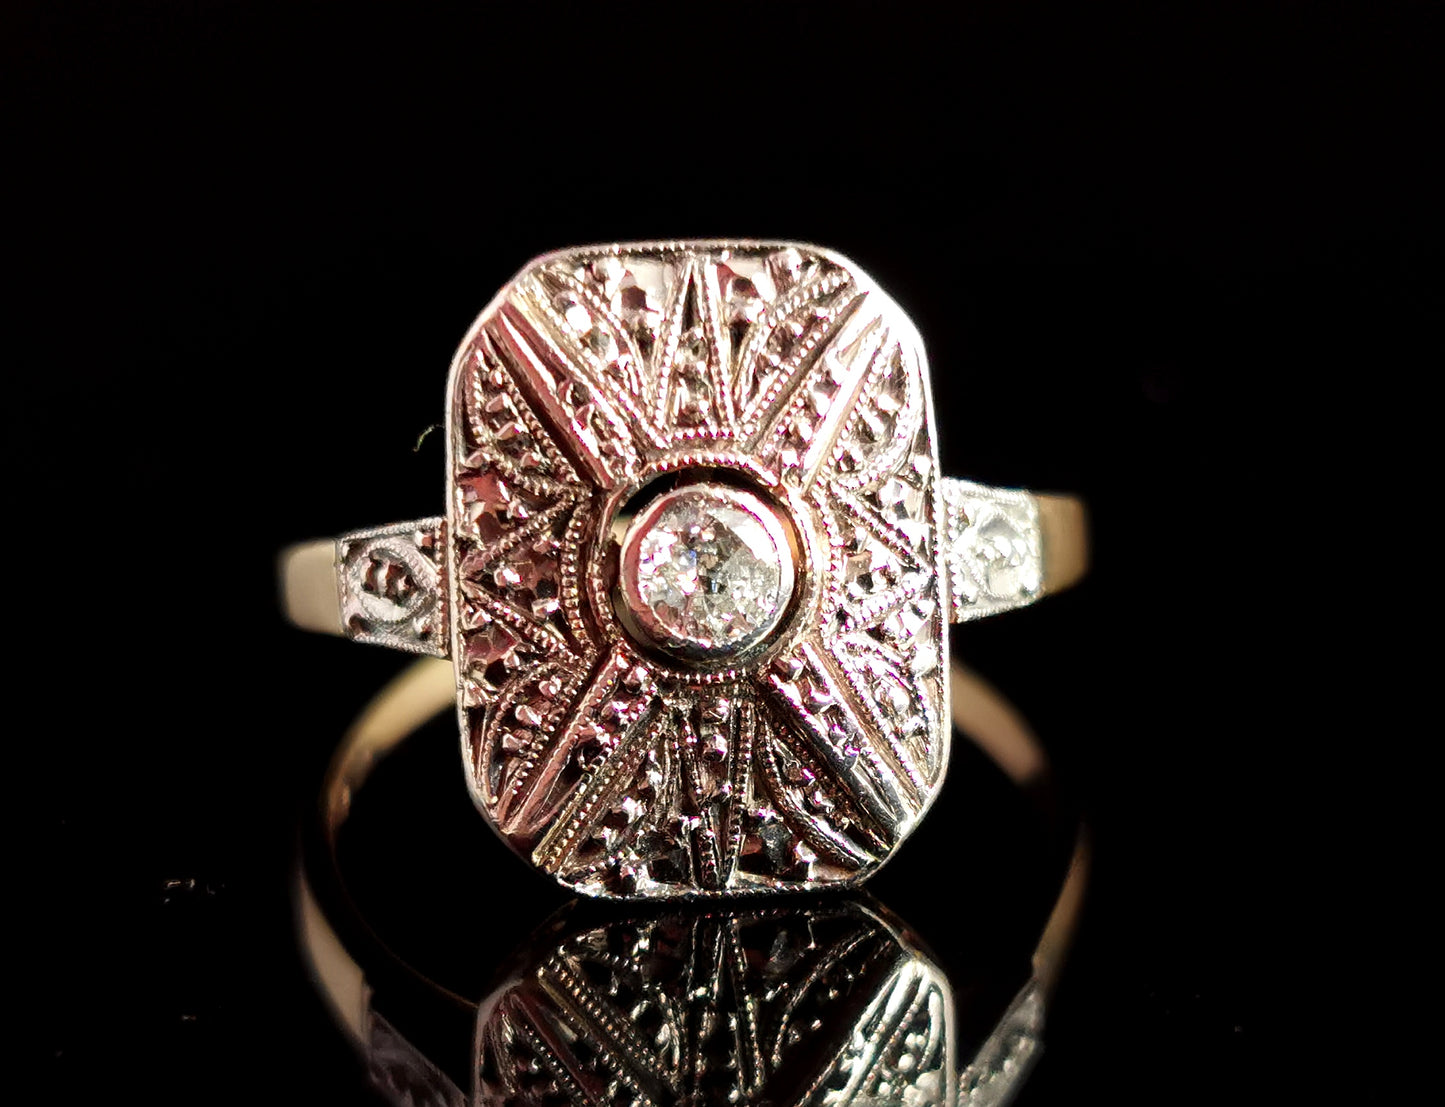 Vintage Art Deco style diamond panel ring, 14ct gold and silver